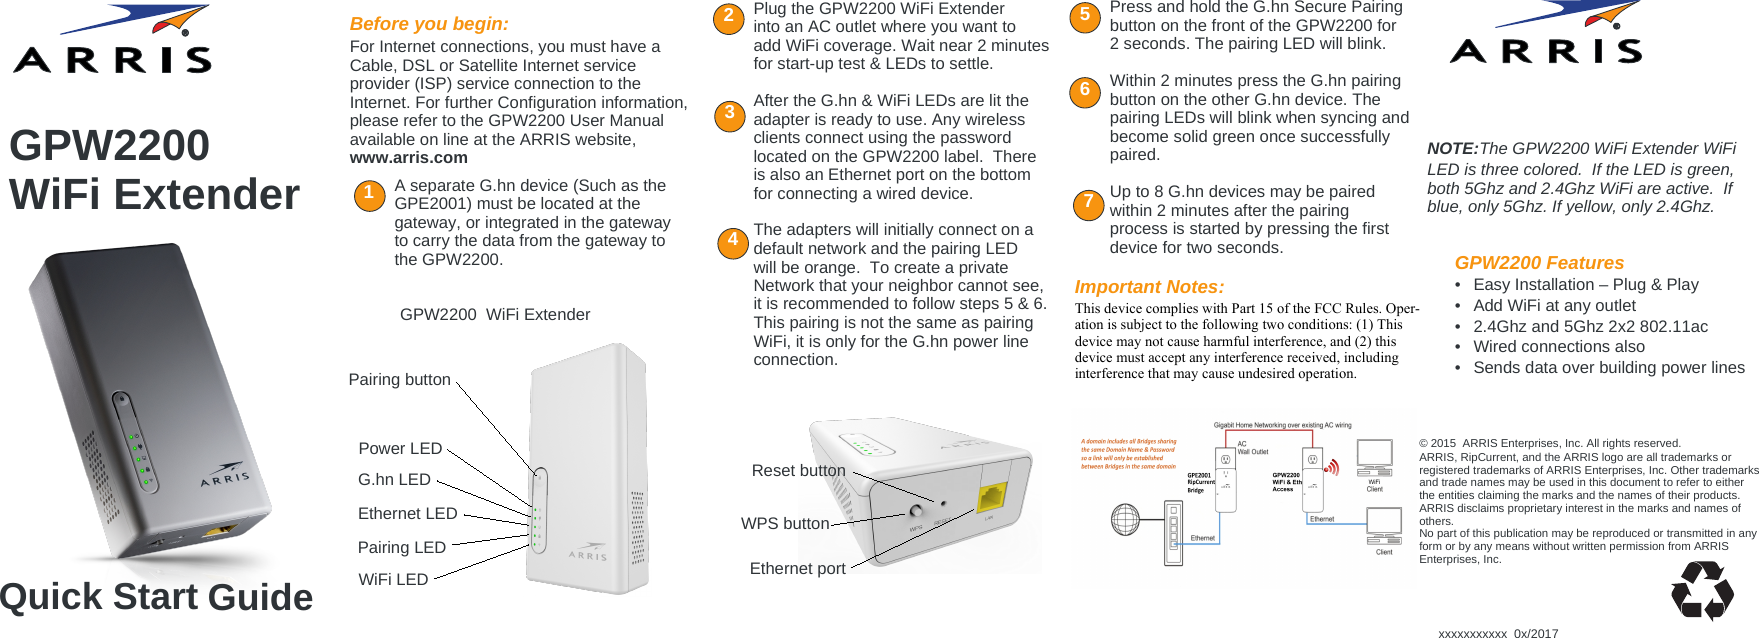 Quick Start GuideGPW2200 WiFi Extender 132A separate G.hn device (Such as the GPE2001) must be located at thegateway, or integrated in the gatewayto carry the data from the gateway tothe GPW2200. Reset buttonPress and hold the G.hn Secure Pairingbutton on the front of the GPW2200 for2 seconds. The pairing LED will blink.Within 2 minutes press the G.hn pairingbutton on the other G.hn device. Thepairing LEDs will blink when syncing andbecome solid green once successfullypaired.Up to 8 G.hn devices may be pairedwithin 2 minutes after the pairingprocess is started by pressing the firstdevice for two seconds.Plug the GPW2200 WiFi Extenderinto an AC outlet where you want toadd WiFi coverage. Wait near 2 minutesfor start-up test &amp; LEDs to settle. After the G.hn &amp; WiFi LEDs are lit theadapter is ready to use. Any wirelessclients connect using the passwordlocated on the GPW2200 label.  Thereis also an Ethernet port on the bottomfor connecting a wired device.The adapters will initially connect on adefault network and the pairing LEDwill be orange.  To create a privateNetwork that your neighbor cannot see,it is recommended to follow steps 5 &amp; 6.This pairing is not the same as pairingWiFi, it is only for the G.hn power lineconnection.Pairing buttonEthernet portGPW2200  WiFi Extender4567xxxxxxxxxxx  0x/2017Before you begin:For Internet connections, you must have aCable, DSL or Satellite Internet serviceprovider (ISP) service connection to theInternet. For further Configuration information,please refer to the GPW2200 User Manualavailable on line at the ARRIS website,www.arris.com© 2015  ARRIS Enterprises, Inc. All rights reserved. ARRIS, RipCurrent, and the ARRIS logo are all trademarks orregistered trademarks of ARRIS Enterprises, Inc. Other trademarksand trade names may be used in this document to refer to eitherthe entities claiming the marks and the names of their products.ARRIS disclaims proprietary interest in the marks and names ofothers.No part of this publication may be reproduced or transmitted in anyform or by any means without written permission from ARRISEnterprises, Inc.GPW2200 Features •  Easy Installation – Plug &amp; Play•  Add WiFi at any outlet•  2.4Ghz and 5Ghz 2x2 802.11ac•  Wired connections also•  Sends data over building power linesEthernet LEDPairing LEDNOTE: The GPW2200 WiFi Extender WiFi LED is three colored.  If the LED is green,both 5Ghz and 2.4Ghz WiFi are active.  Ifblue, only 5Ghz. If yellow, only 2.4Ghz. G.hn LEDPower LEDImportant Notes:This device complies with Part 15 of the FCC Rules. Oper-ation is subject to the following two conditions: (1) Thisdevice may not cause harmful interference, and (2) thisdevice must accept any interference received, includinginterference that may cause undesired operation.WiFi LEDWPS button